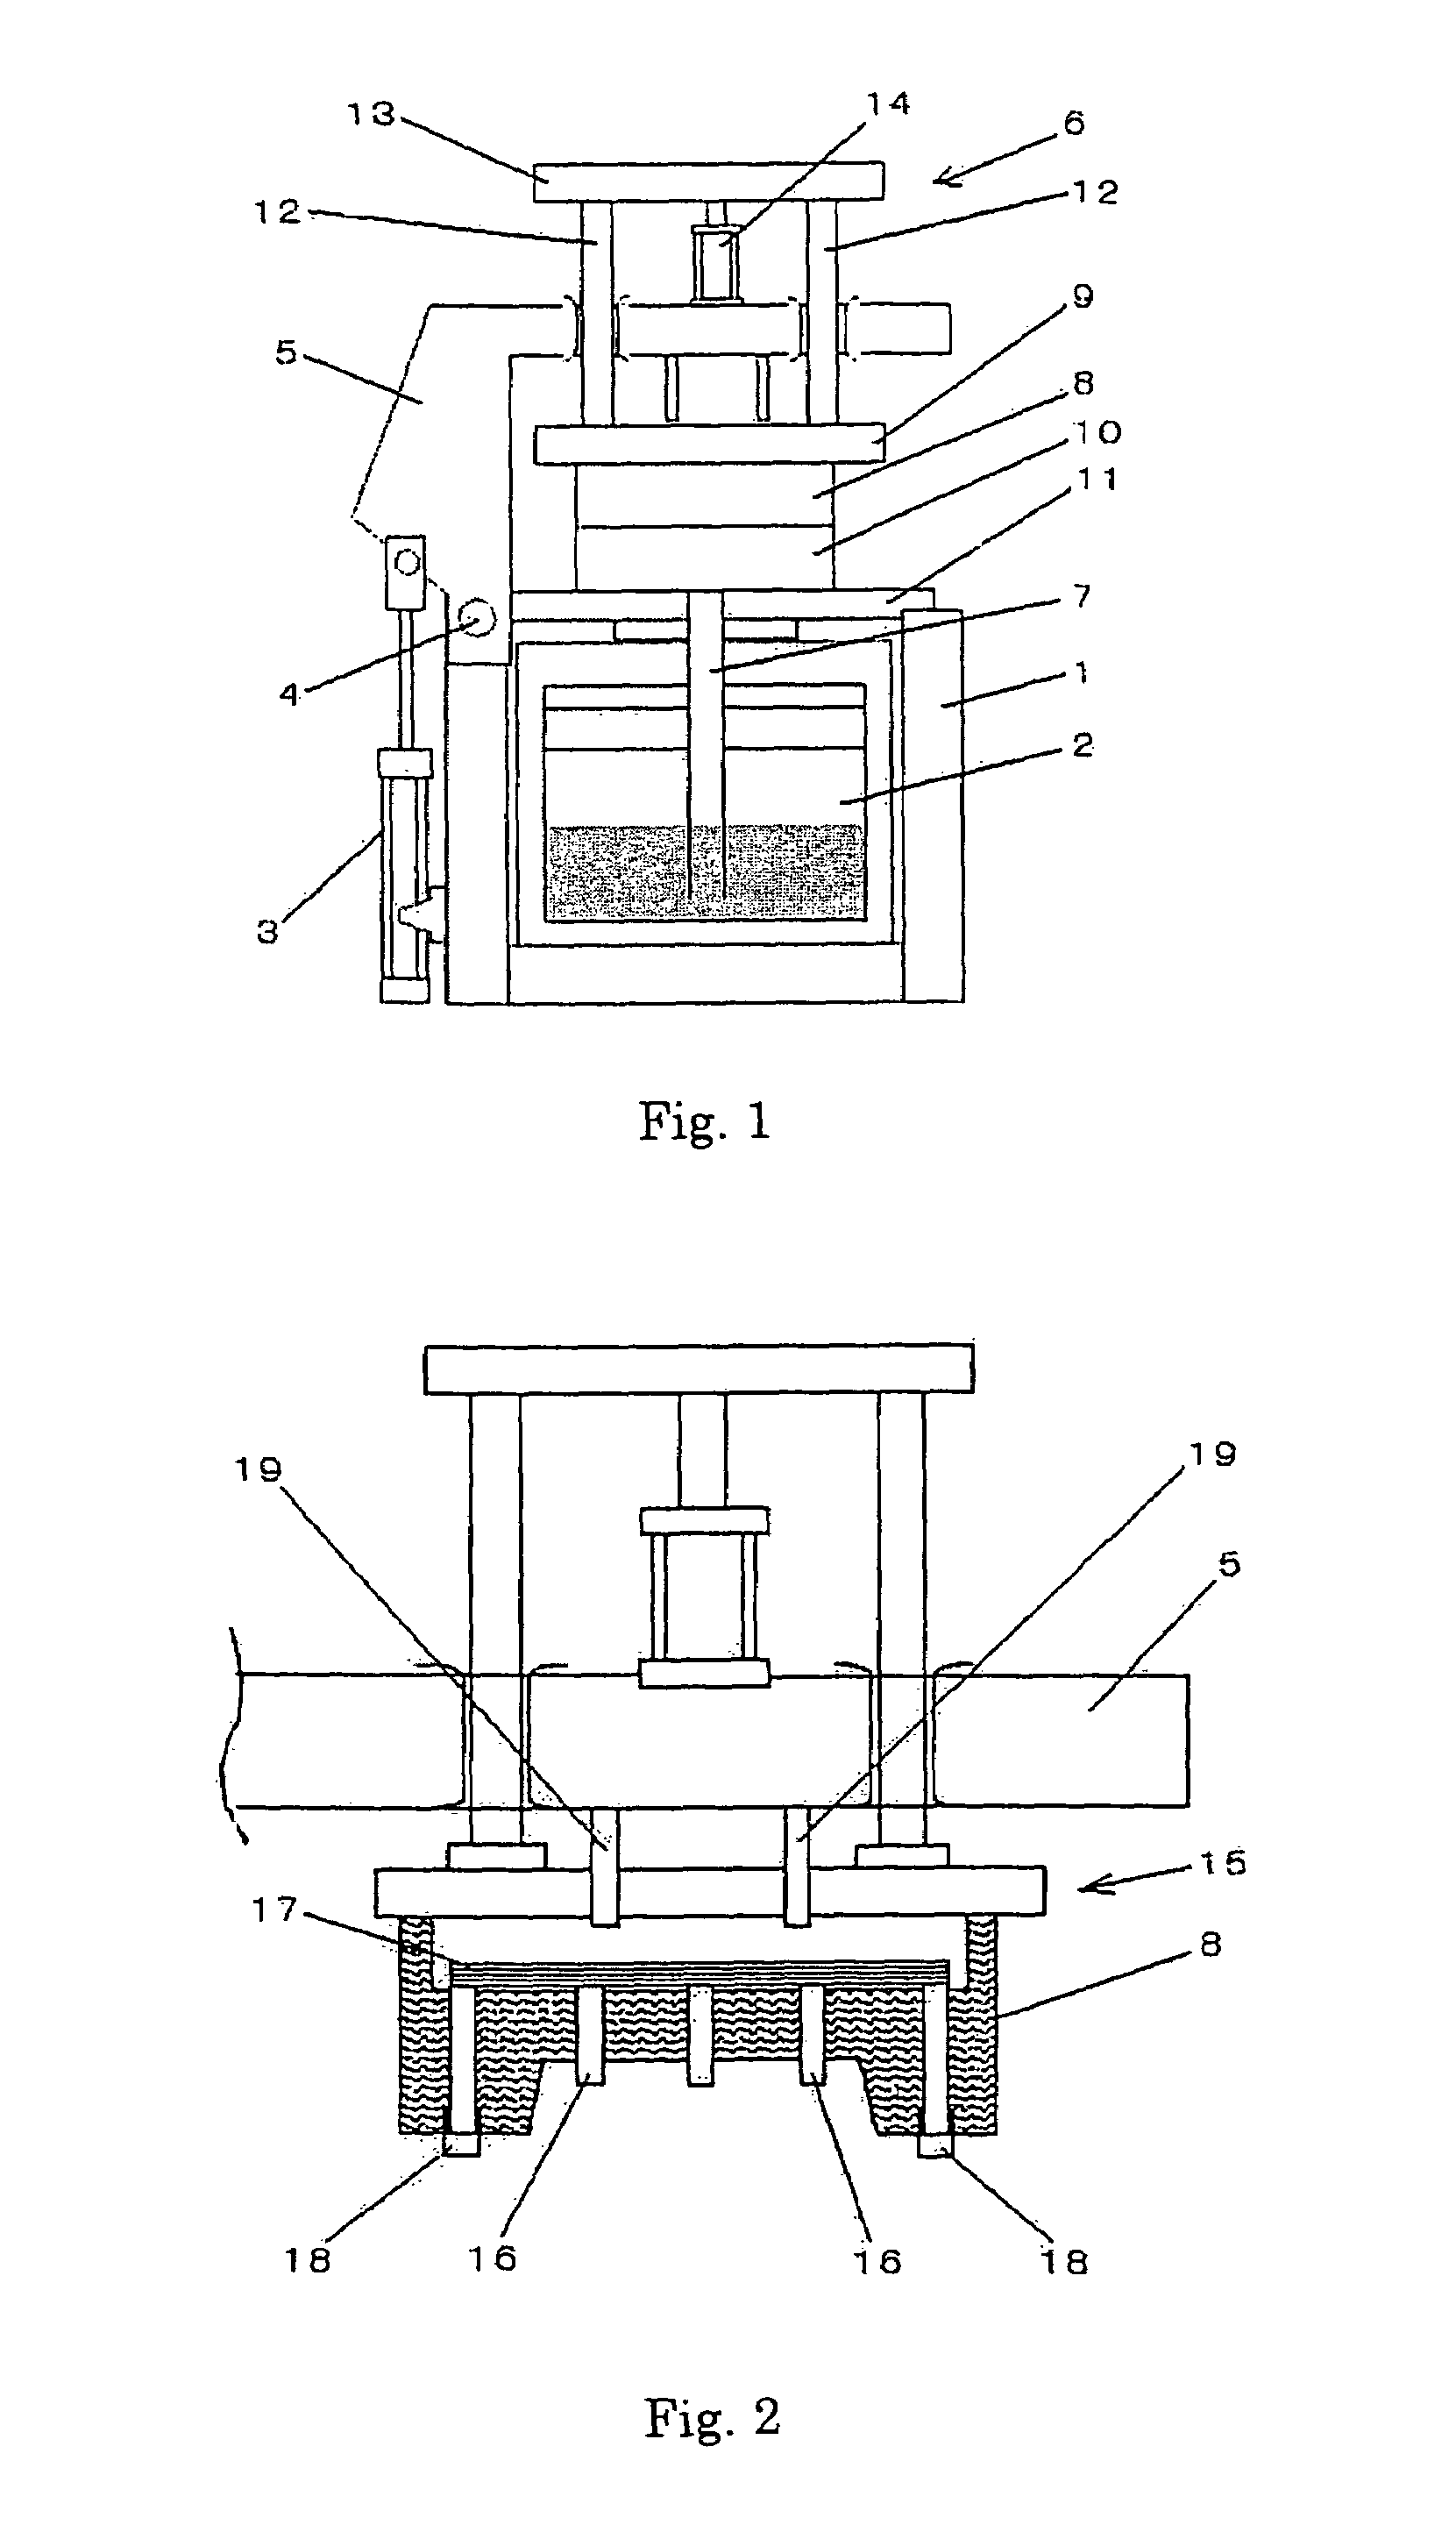 Metal mold casting device using metal cope and metal drag and device for moving metal cope relative to metal drag